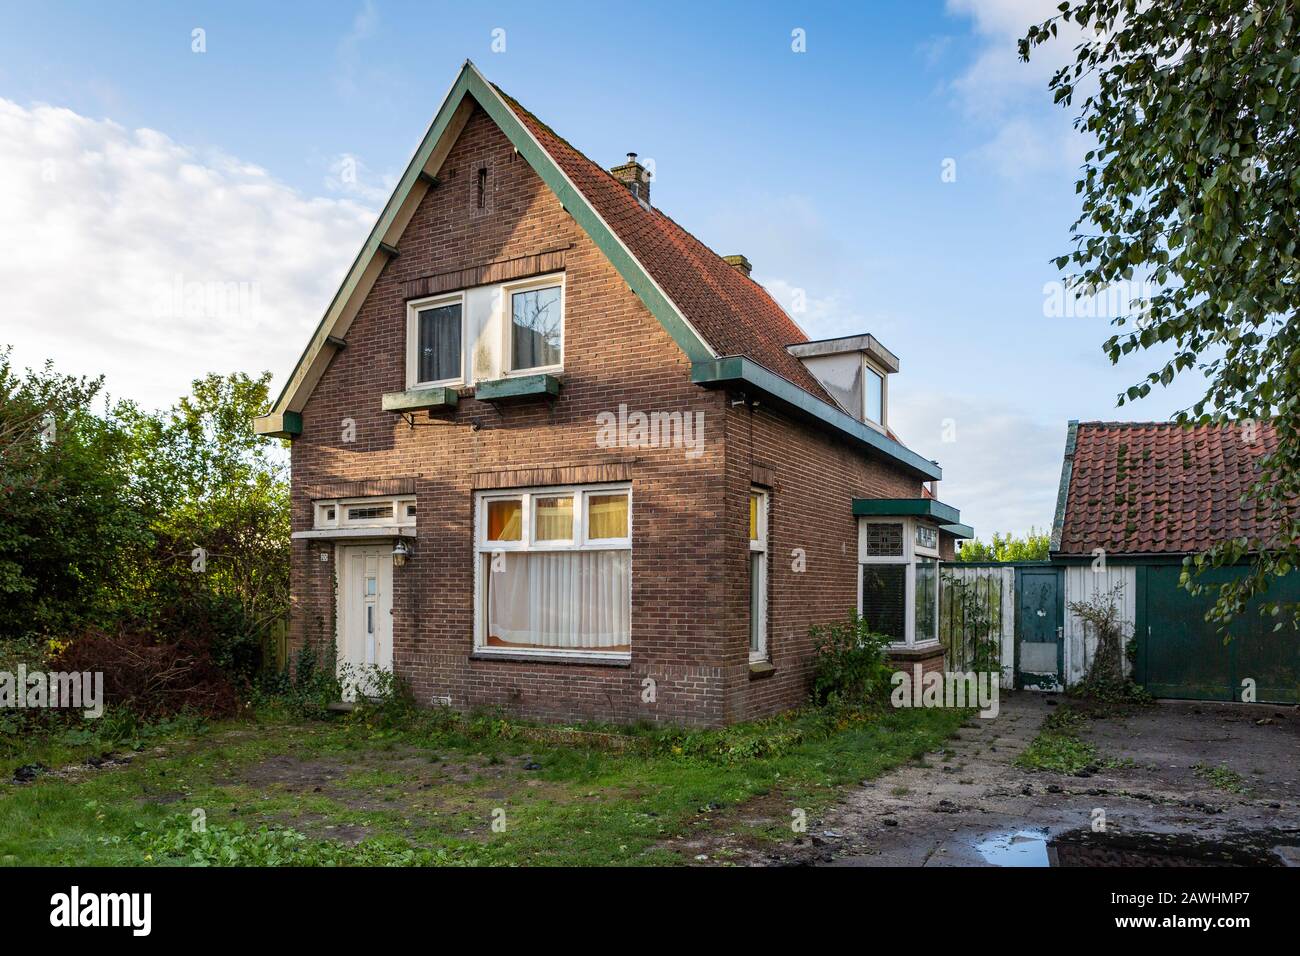 Small isolated and abandoned single family house in Lisse the netherlands. Stock Photo